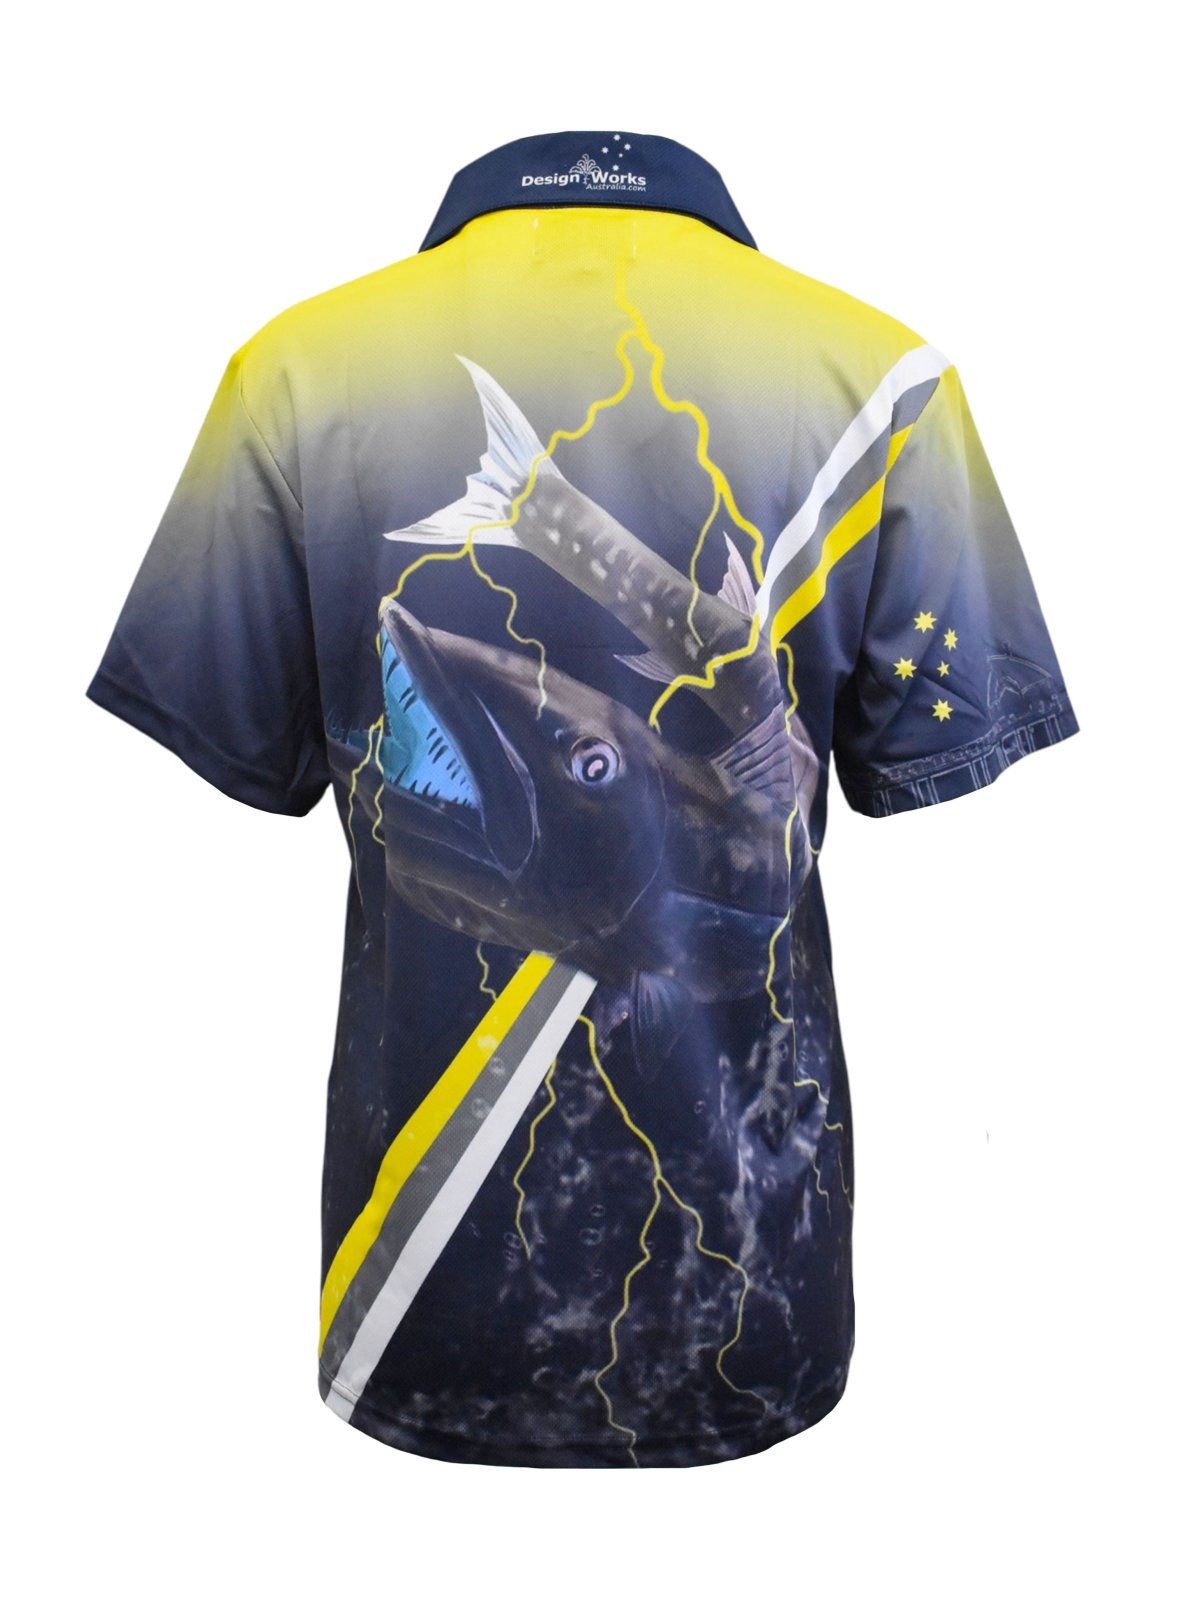 Adult Short Sleeve Fishing Shirts - The Game